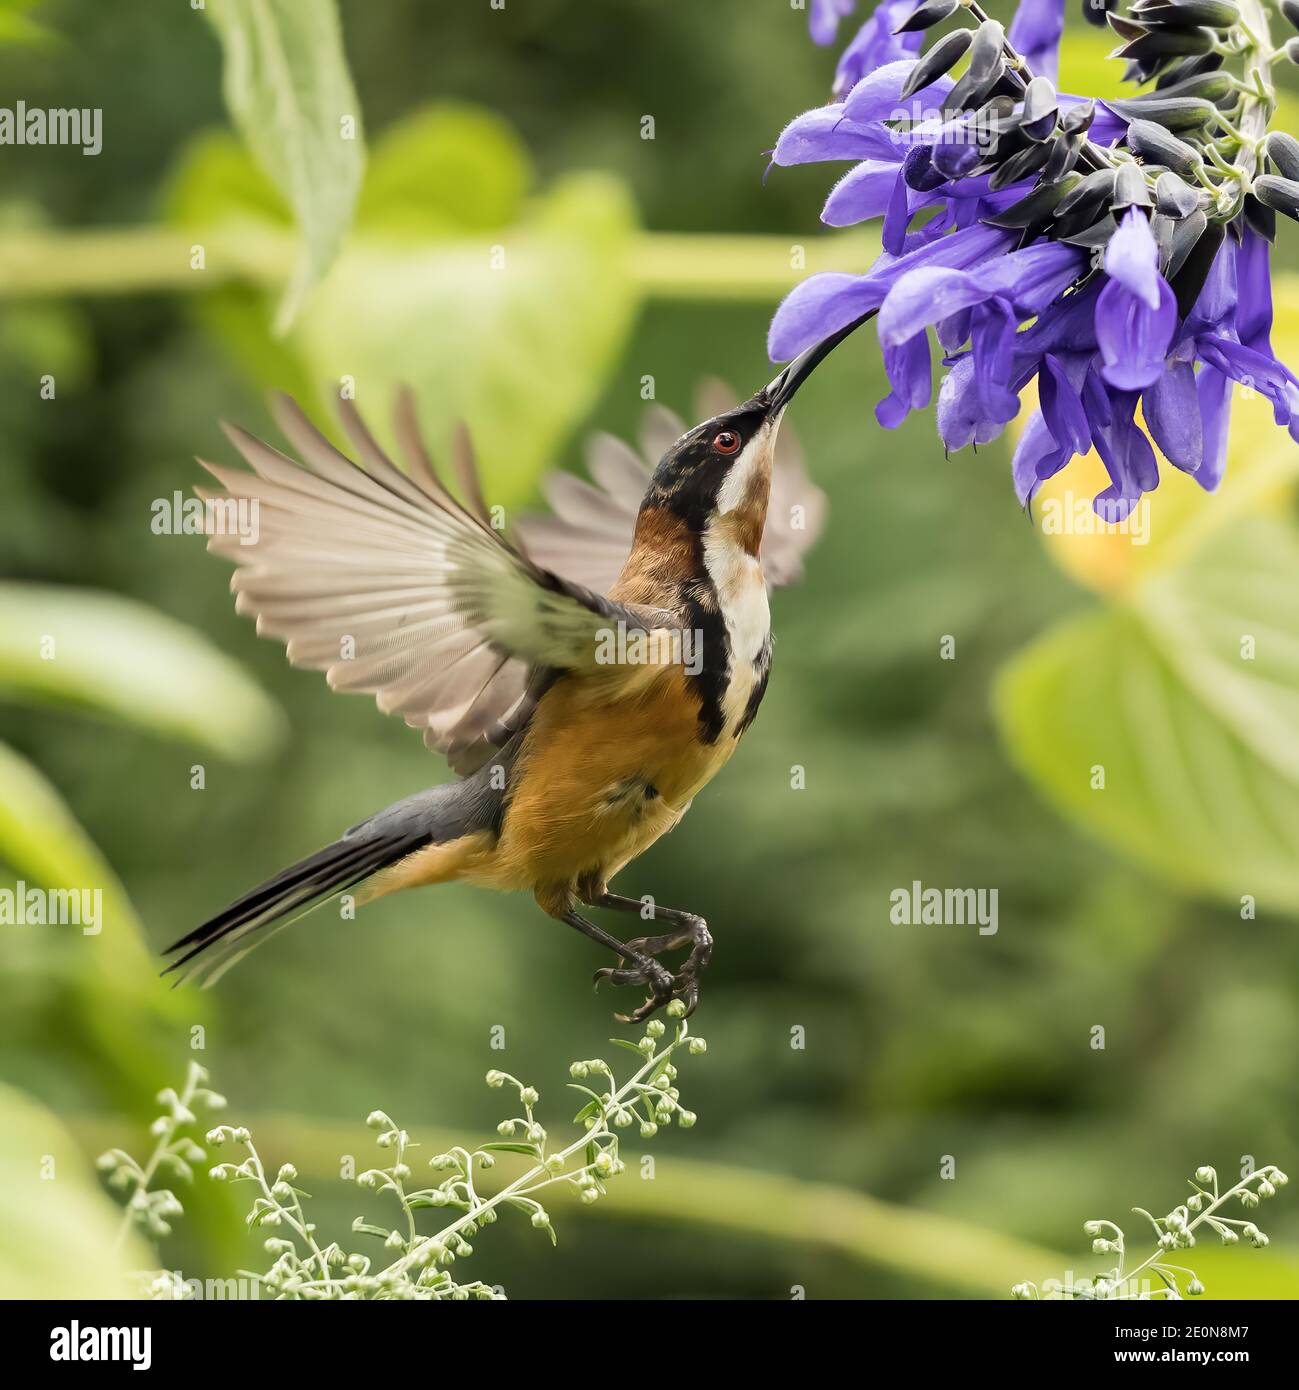 The eastern spinebill is a species of honeyeater found in south-eastern Australia in forest and woodland areas, as well as gardens. Stock Photo